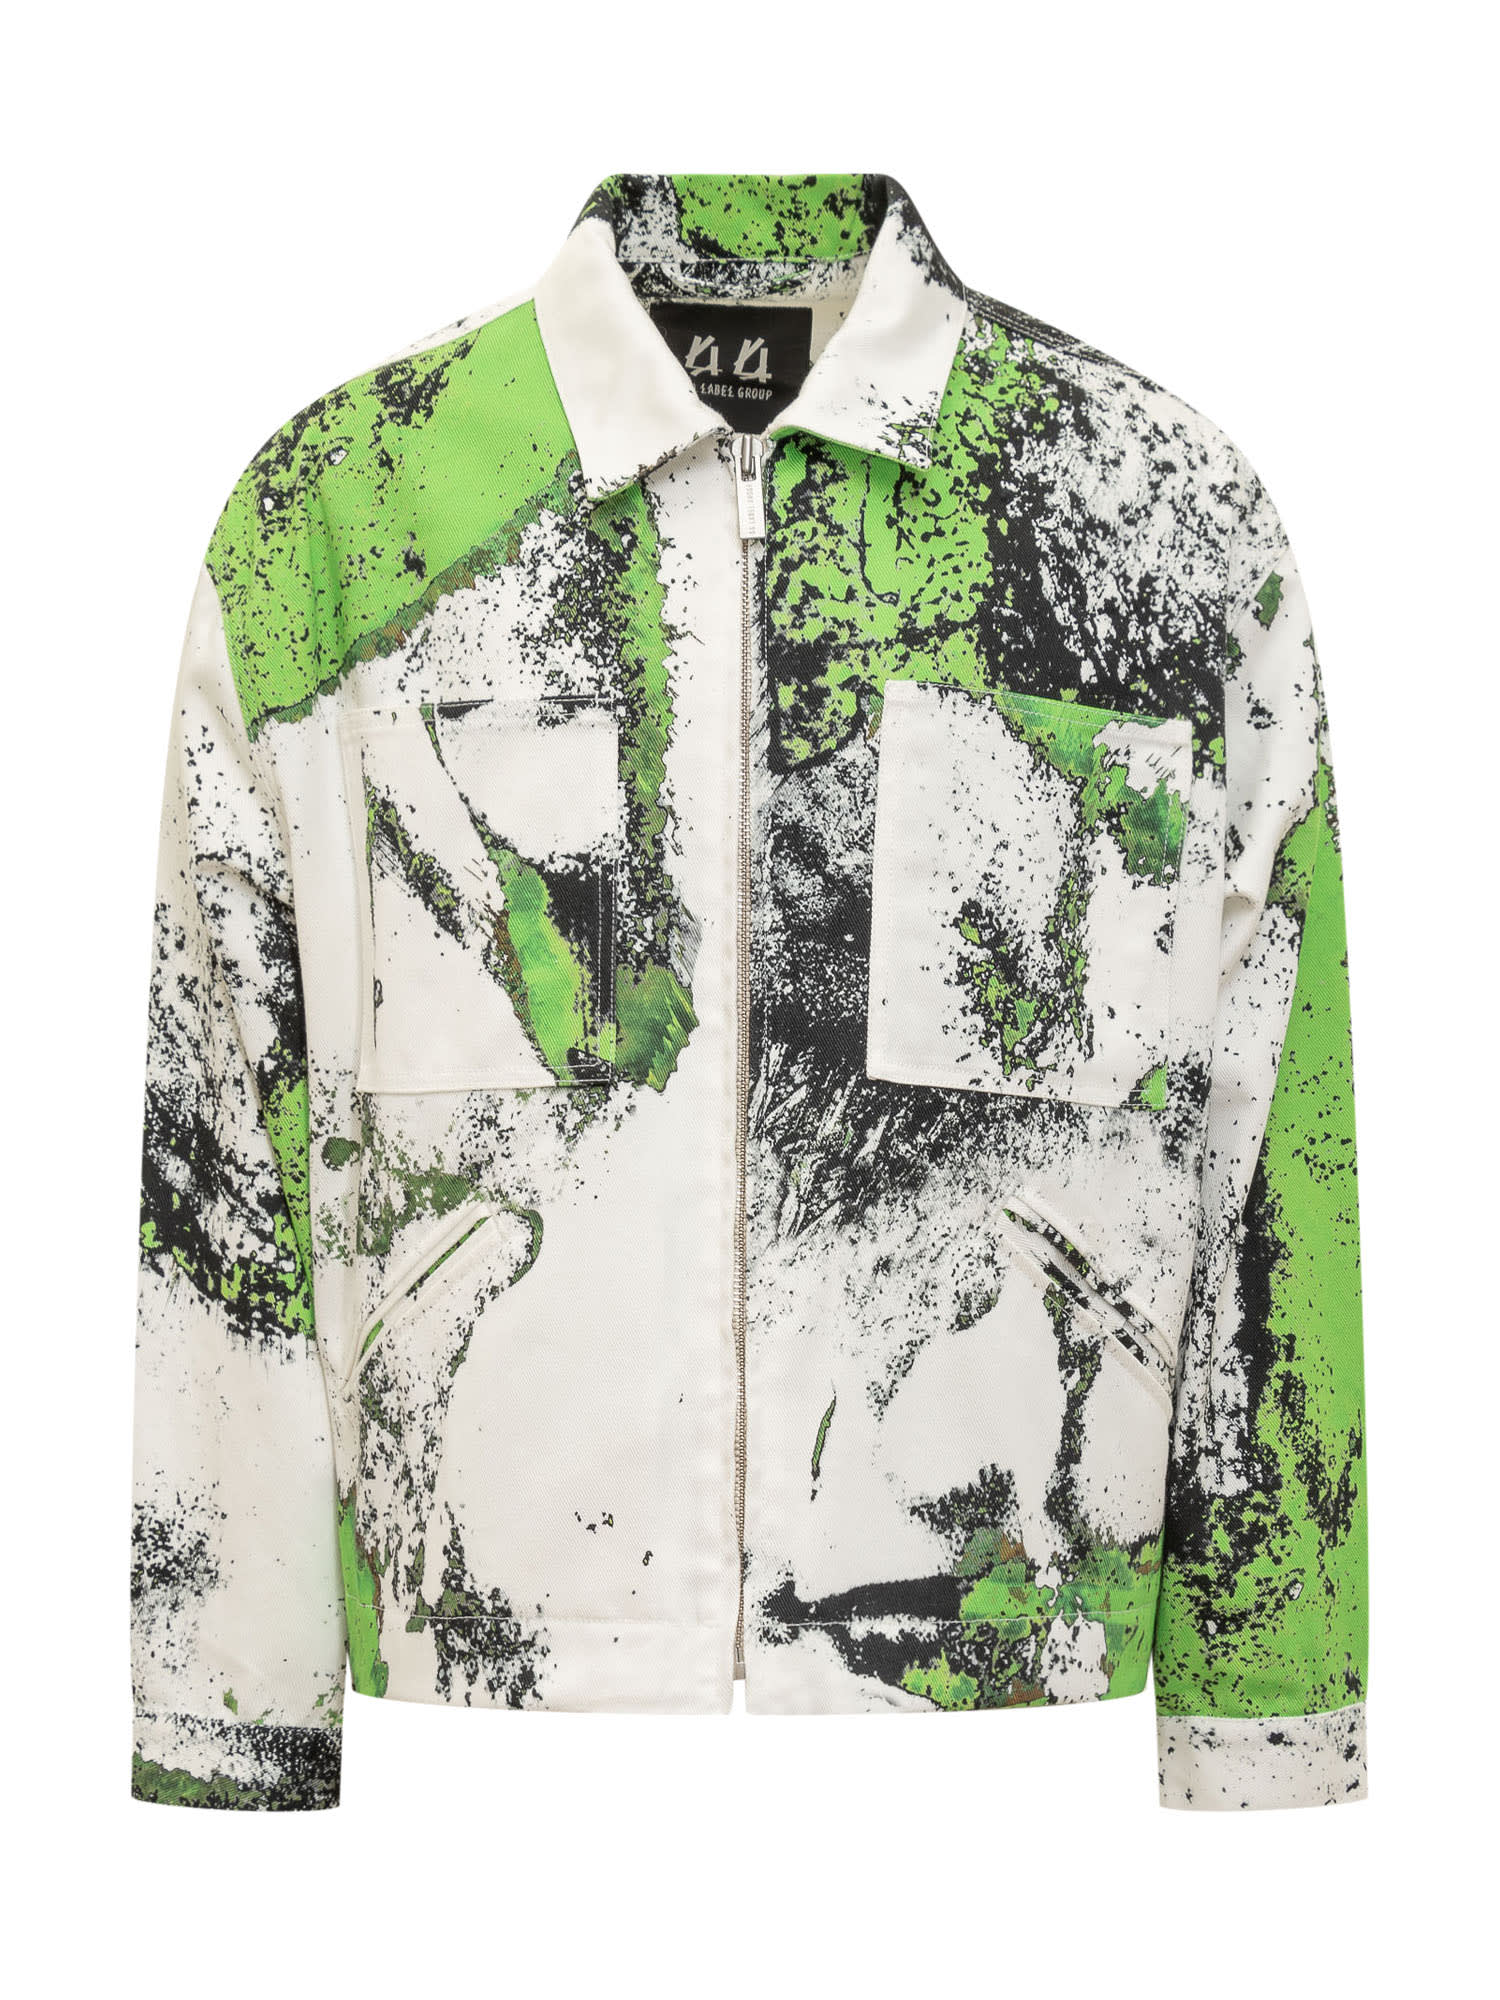 Shop 44 Label Group Jacket With Corrosive Effect In White-grunge Green